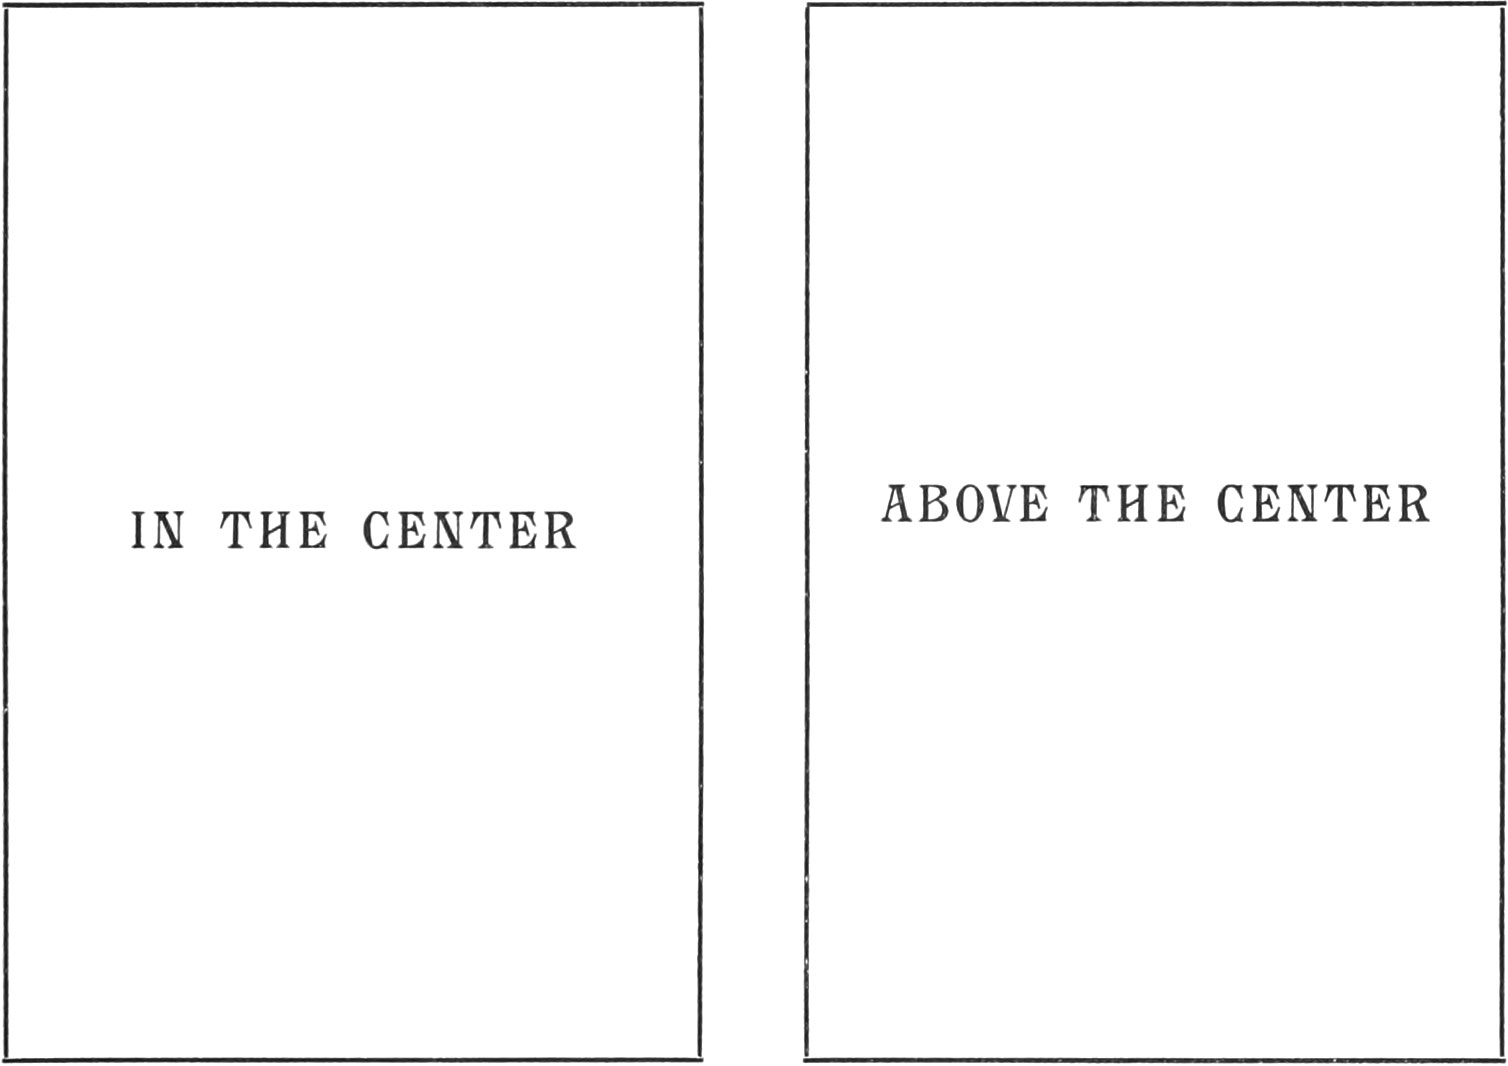 Two boxes side by side, the left with a line of text centered vertically and the right with text slightly above center